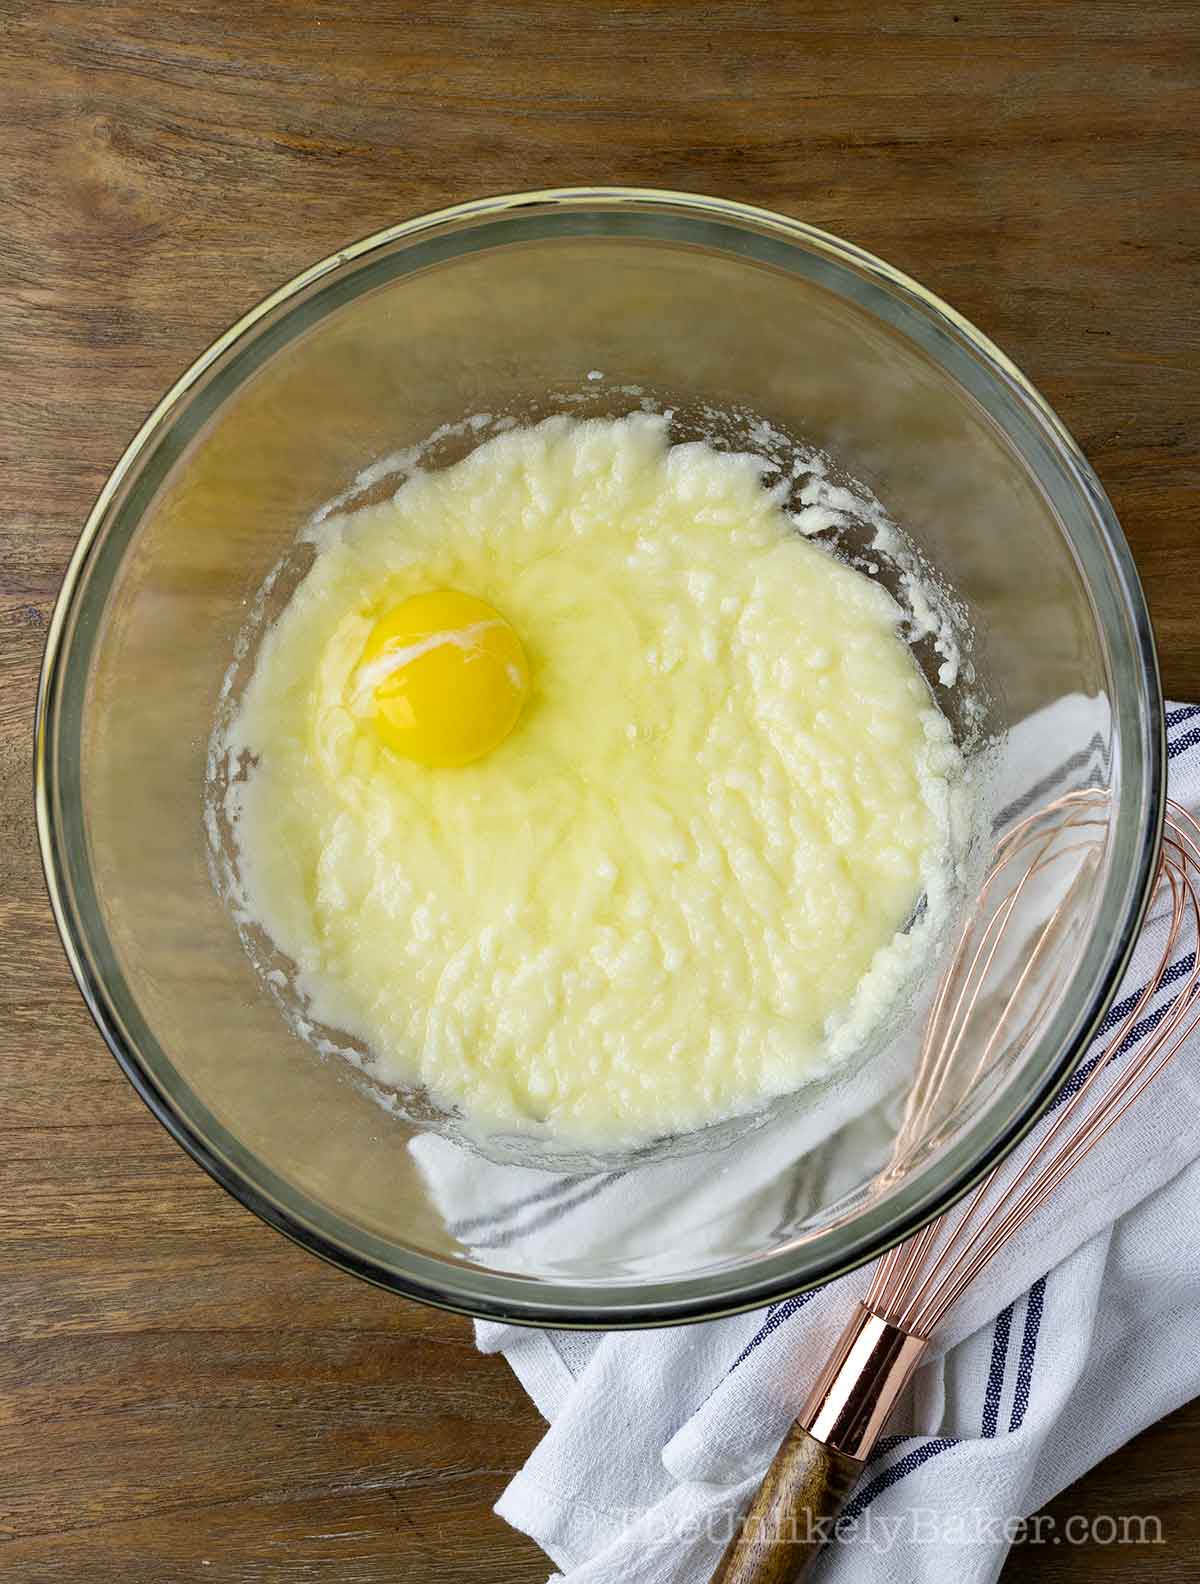 Eggs added to butter mixture.